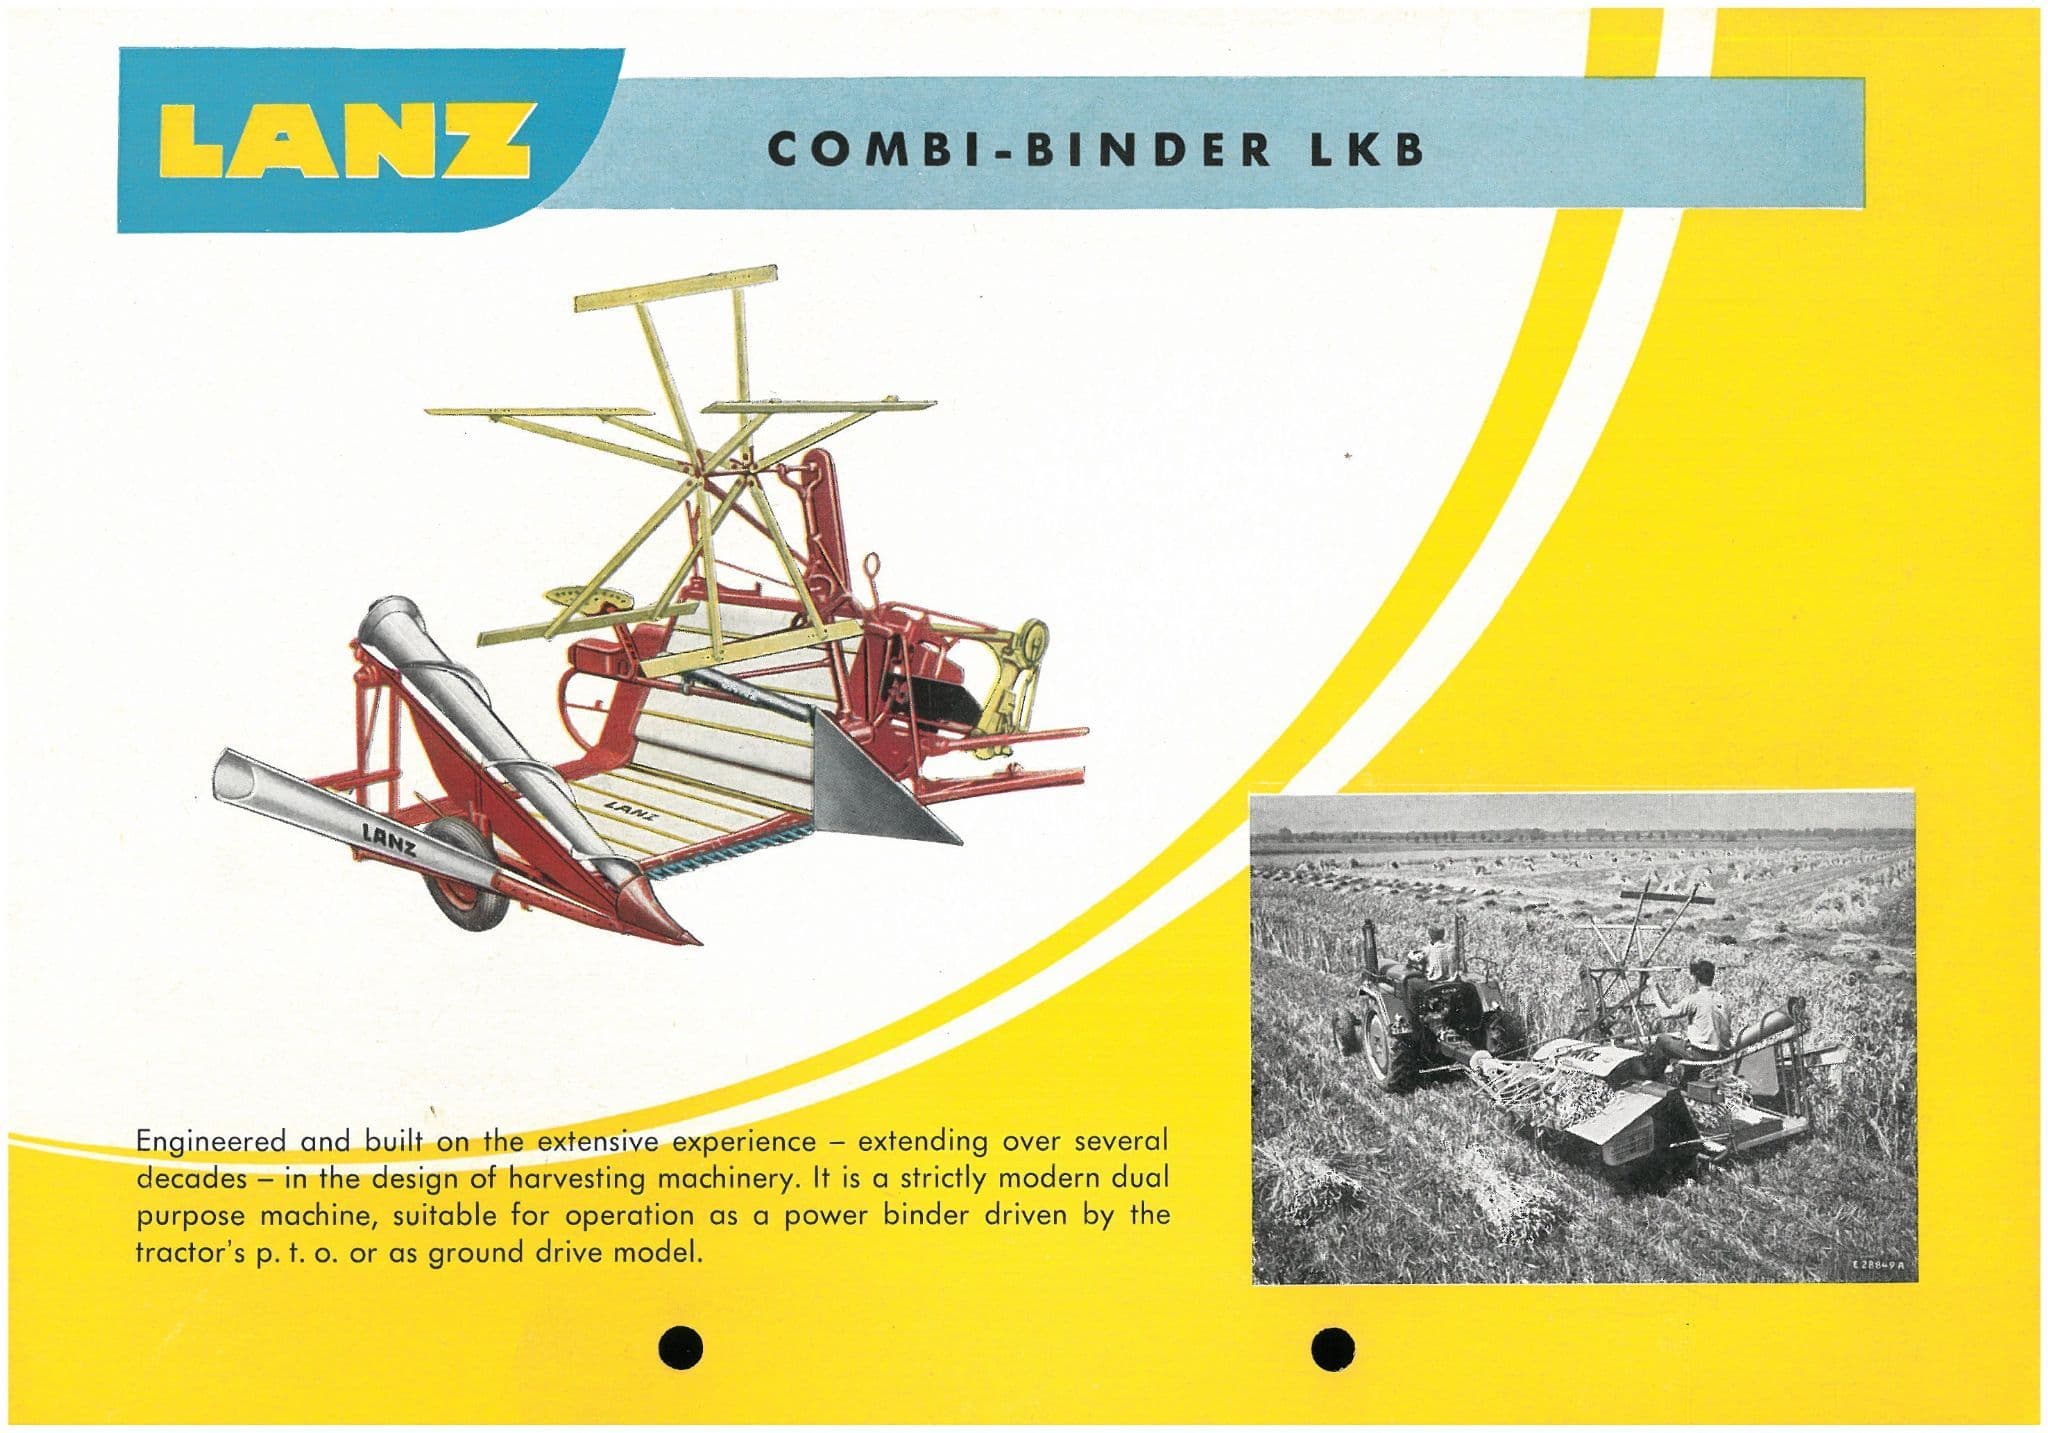 lanz-alldog-tractor-brochure-also-shows-34-of-the-90-possible-implements-[11]-39351-p.jpg